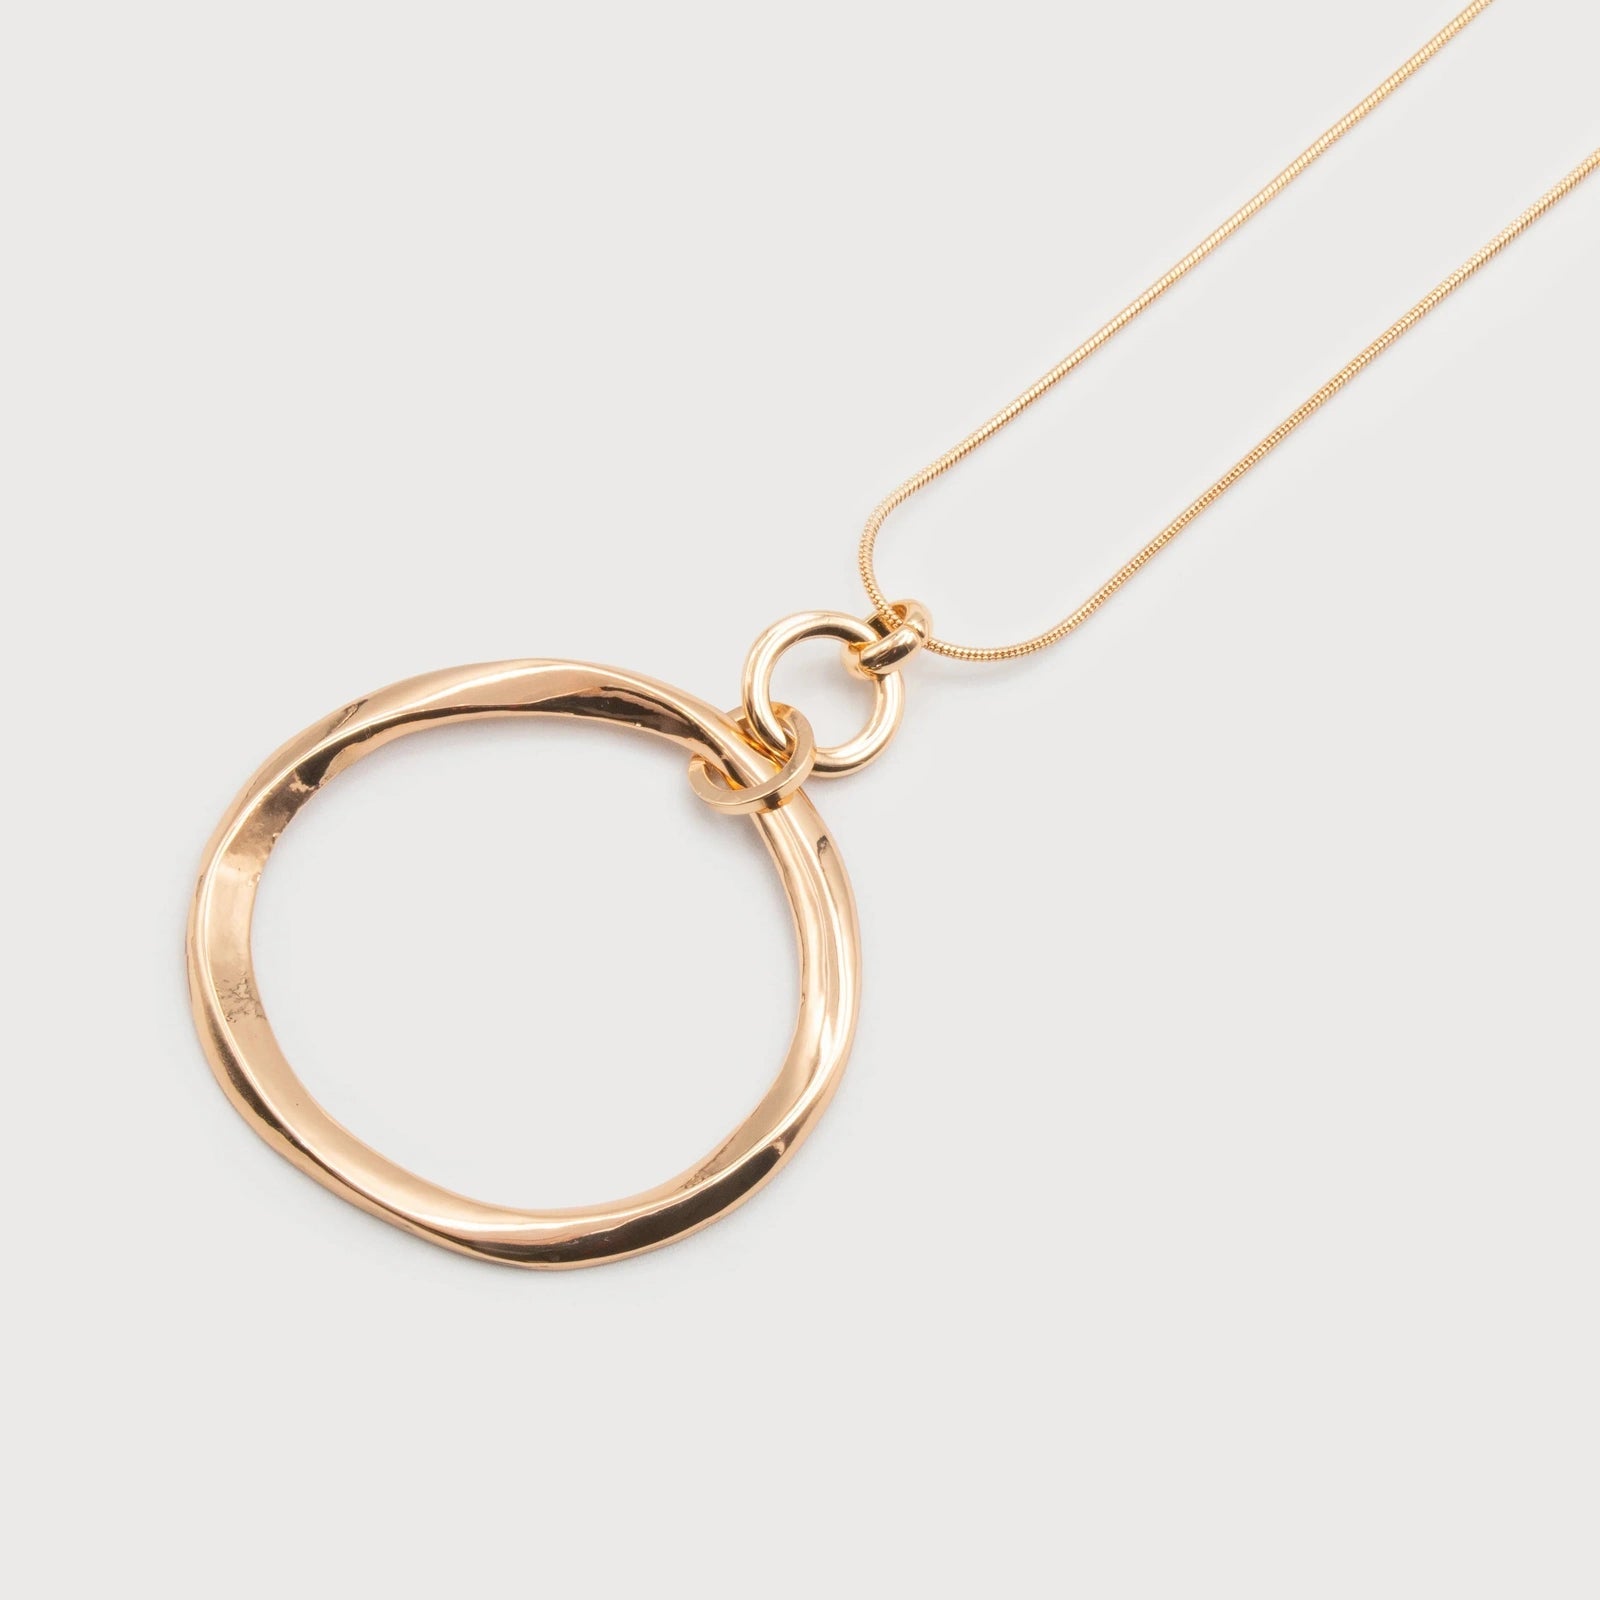 Kyoto Wavy Ring Pendant on Long Adjustable Chain